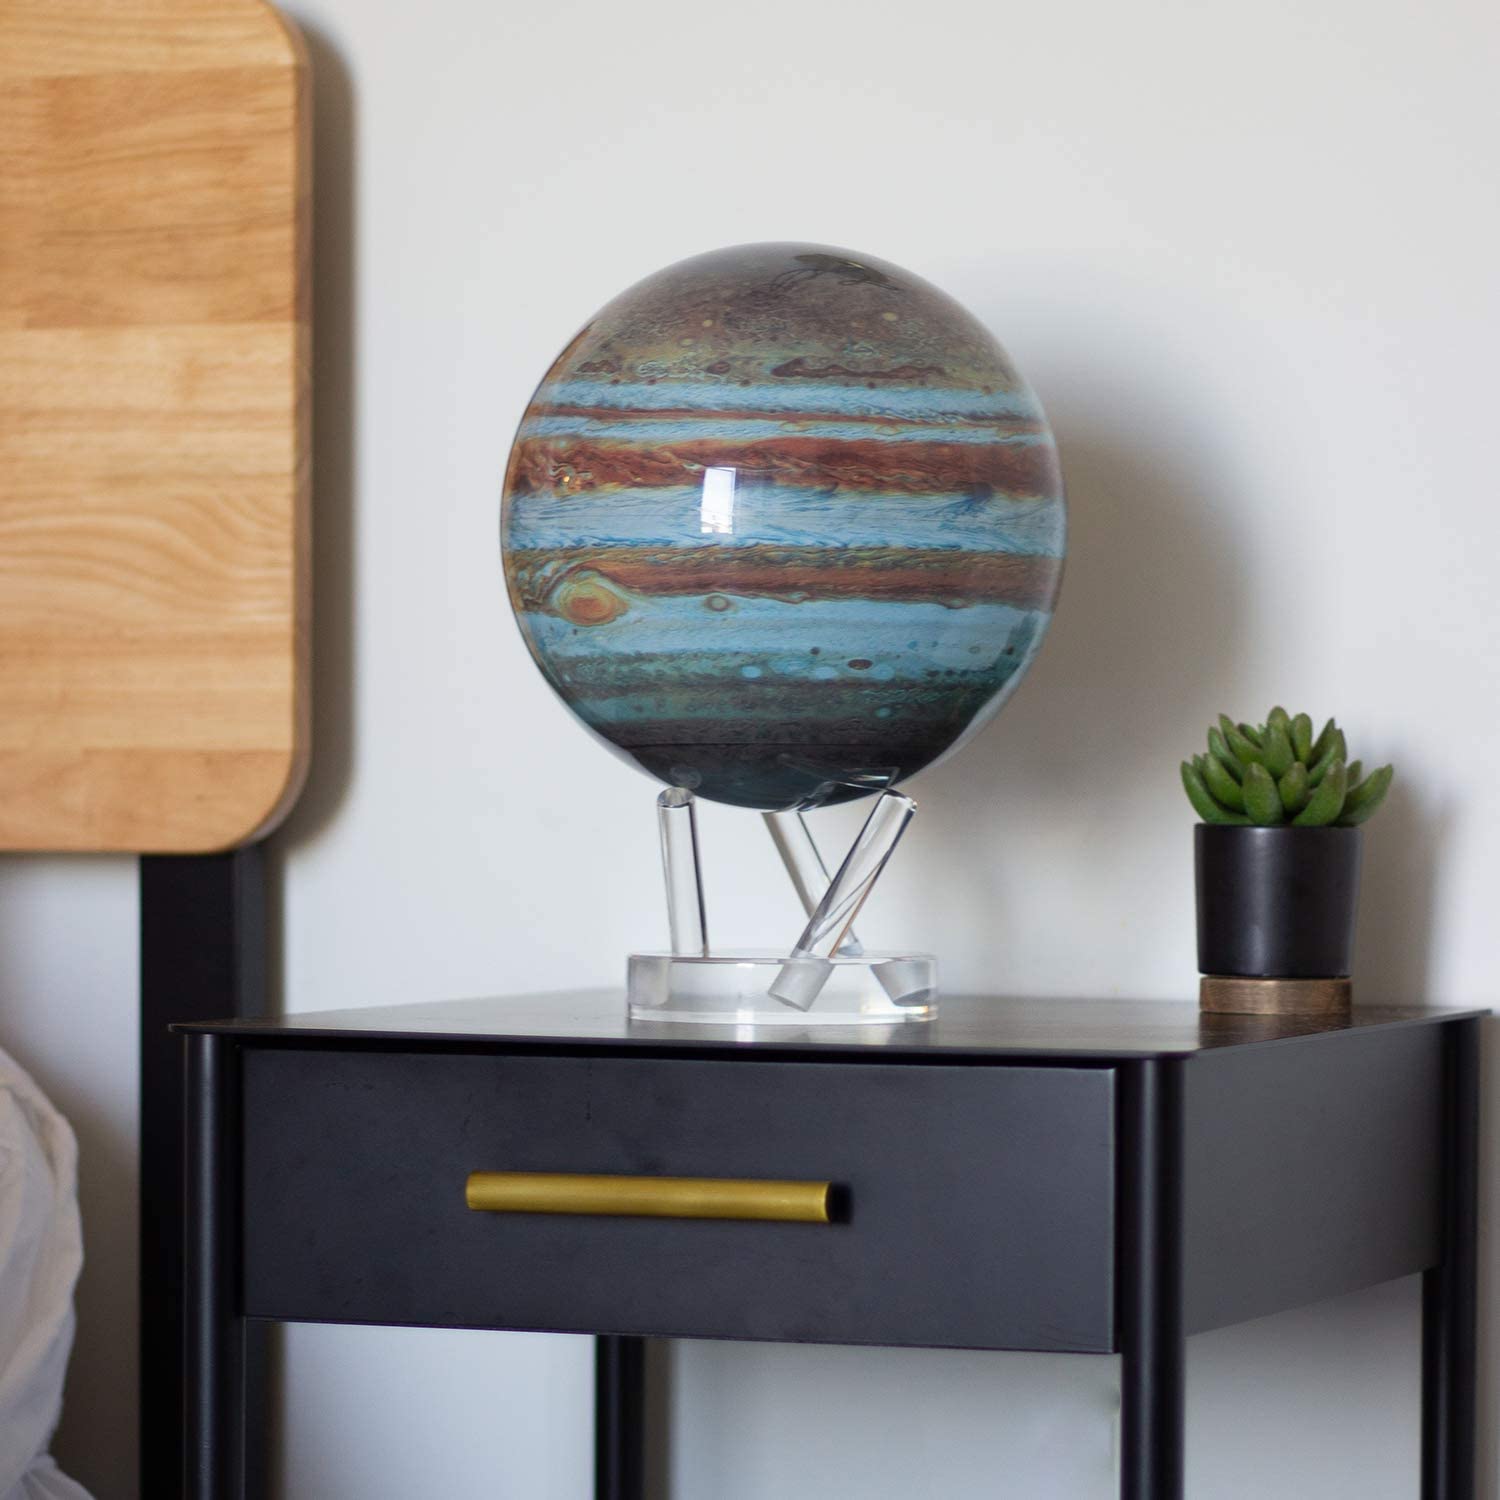 A rotating version of planet Jupiter including the Great Red Spot on a acrylic stand. The globe is on a black bedside table.